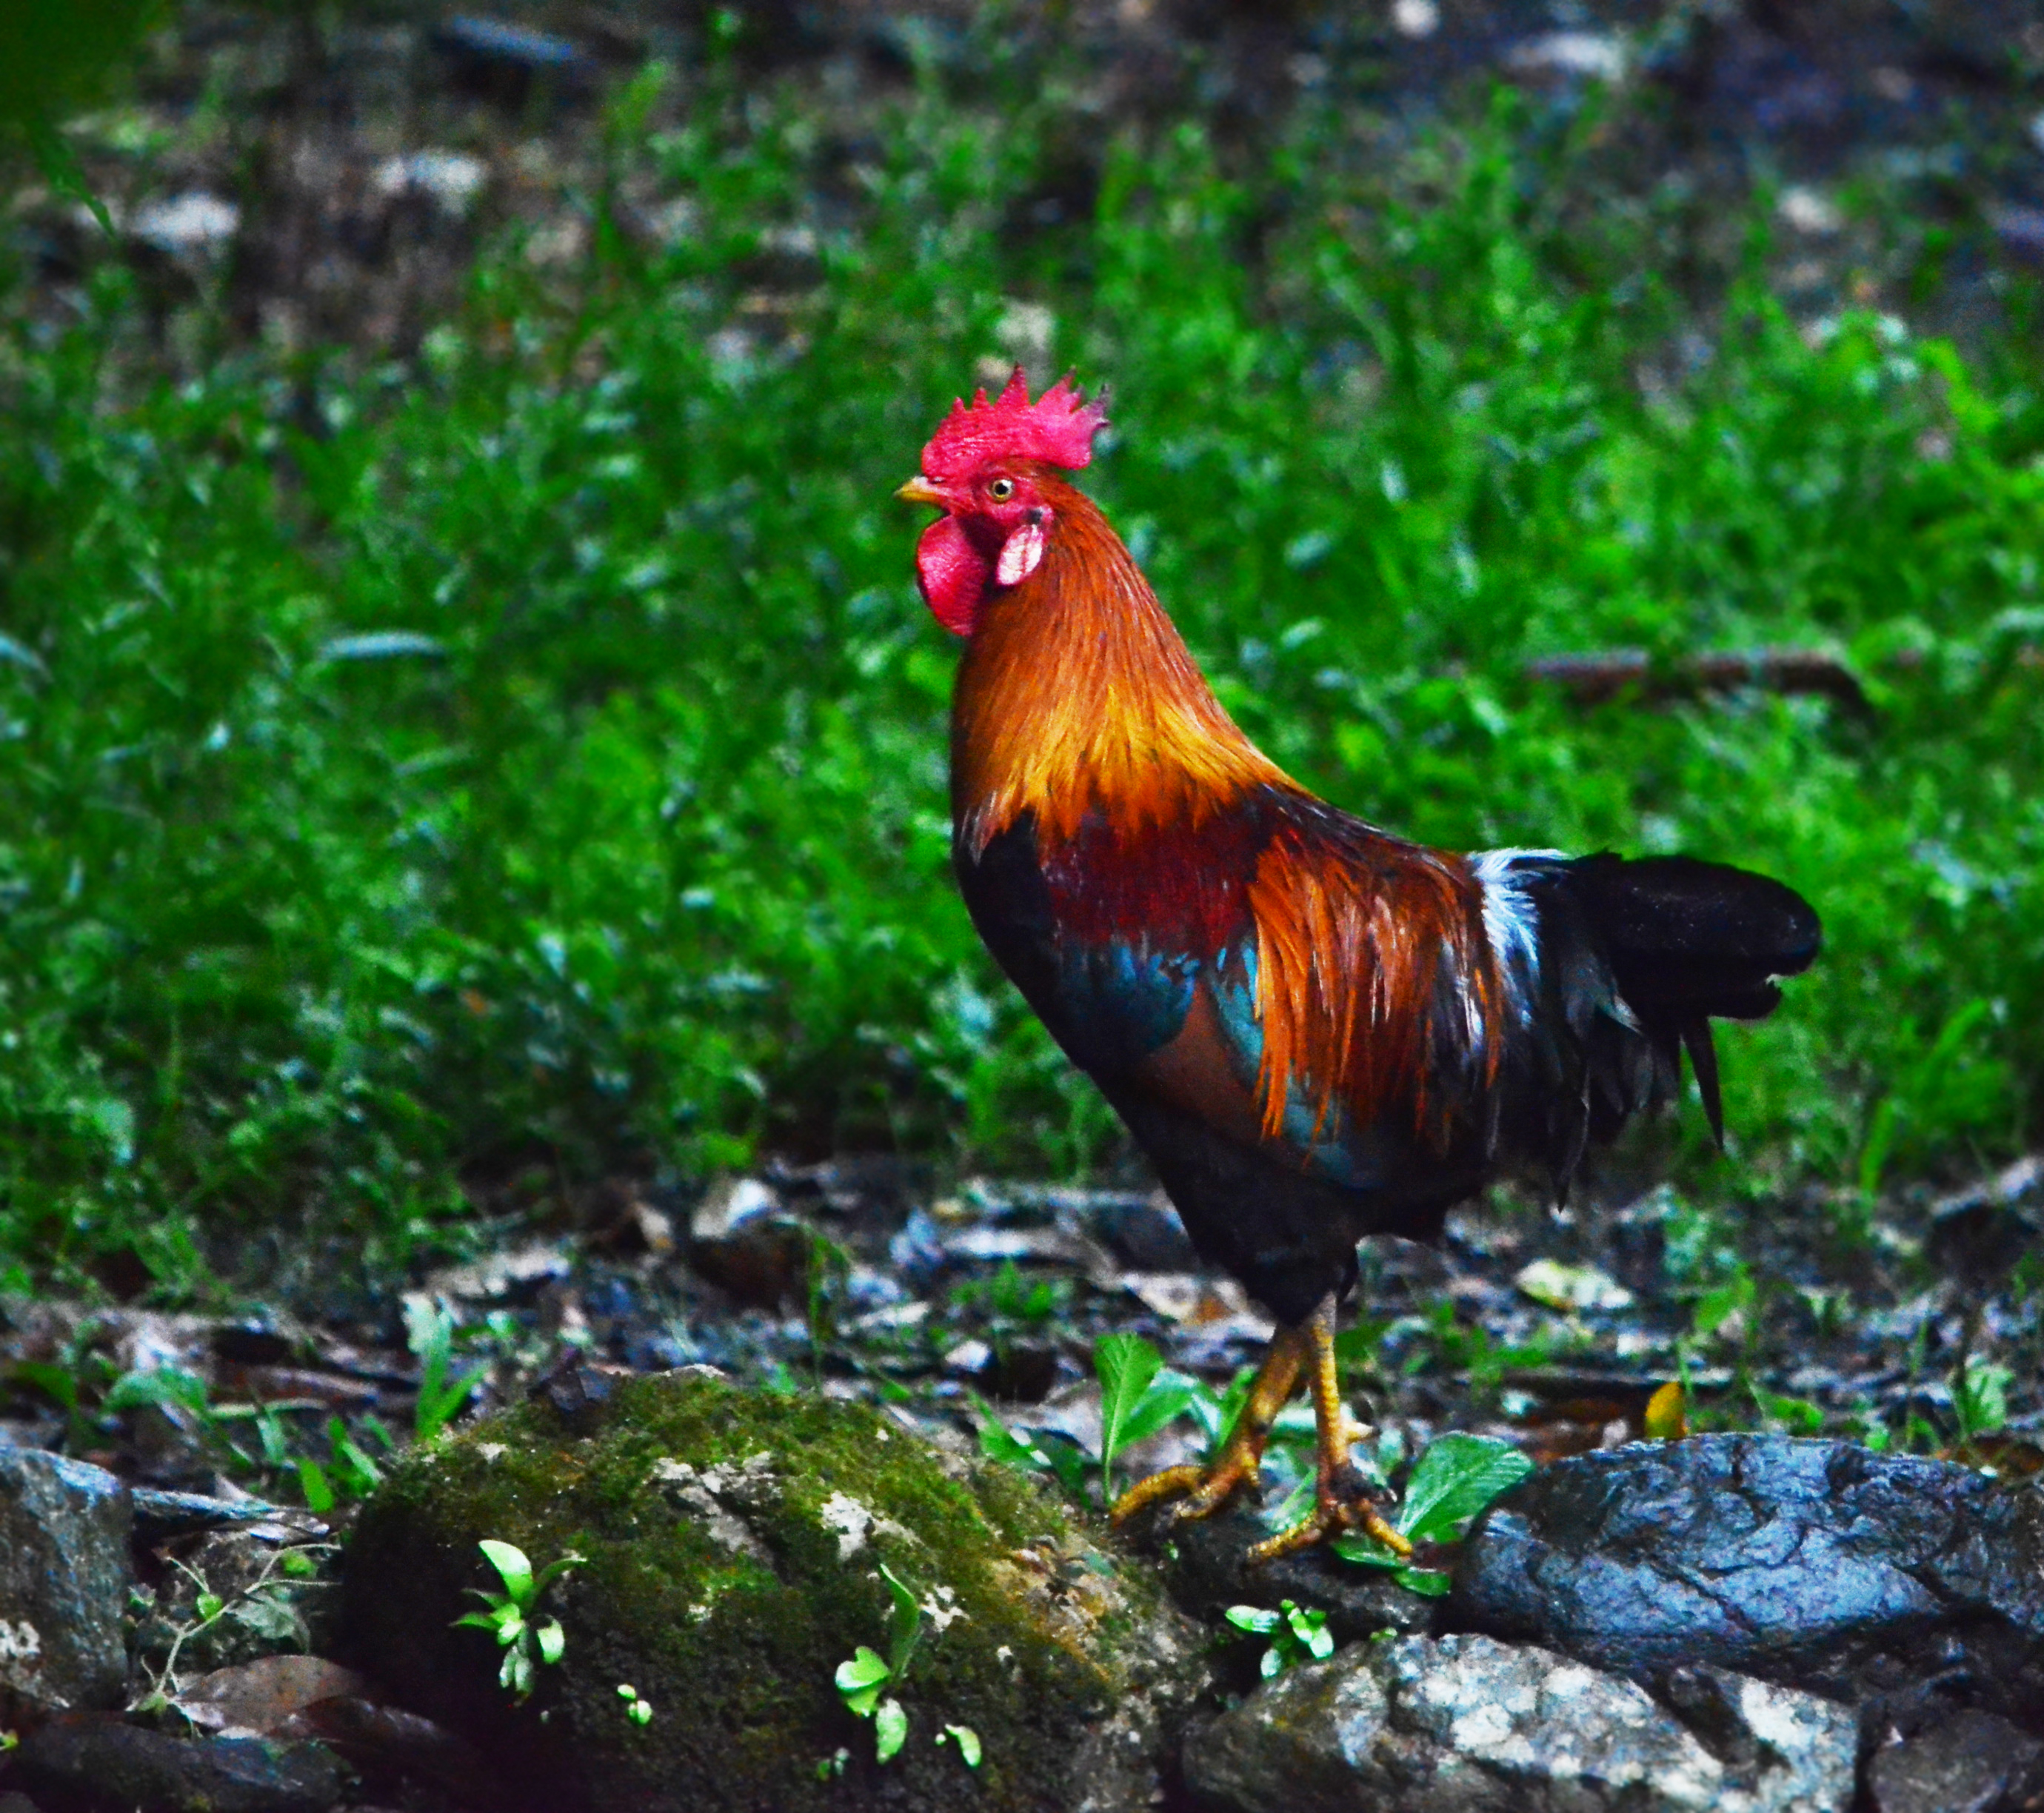 Farming heritage chicken breeds of the Philippines | The Poultry Site